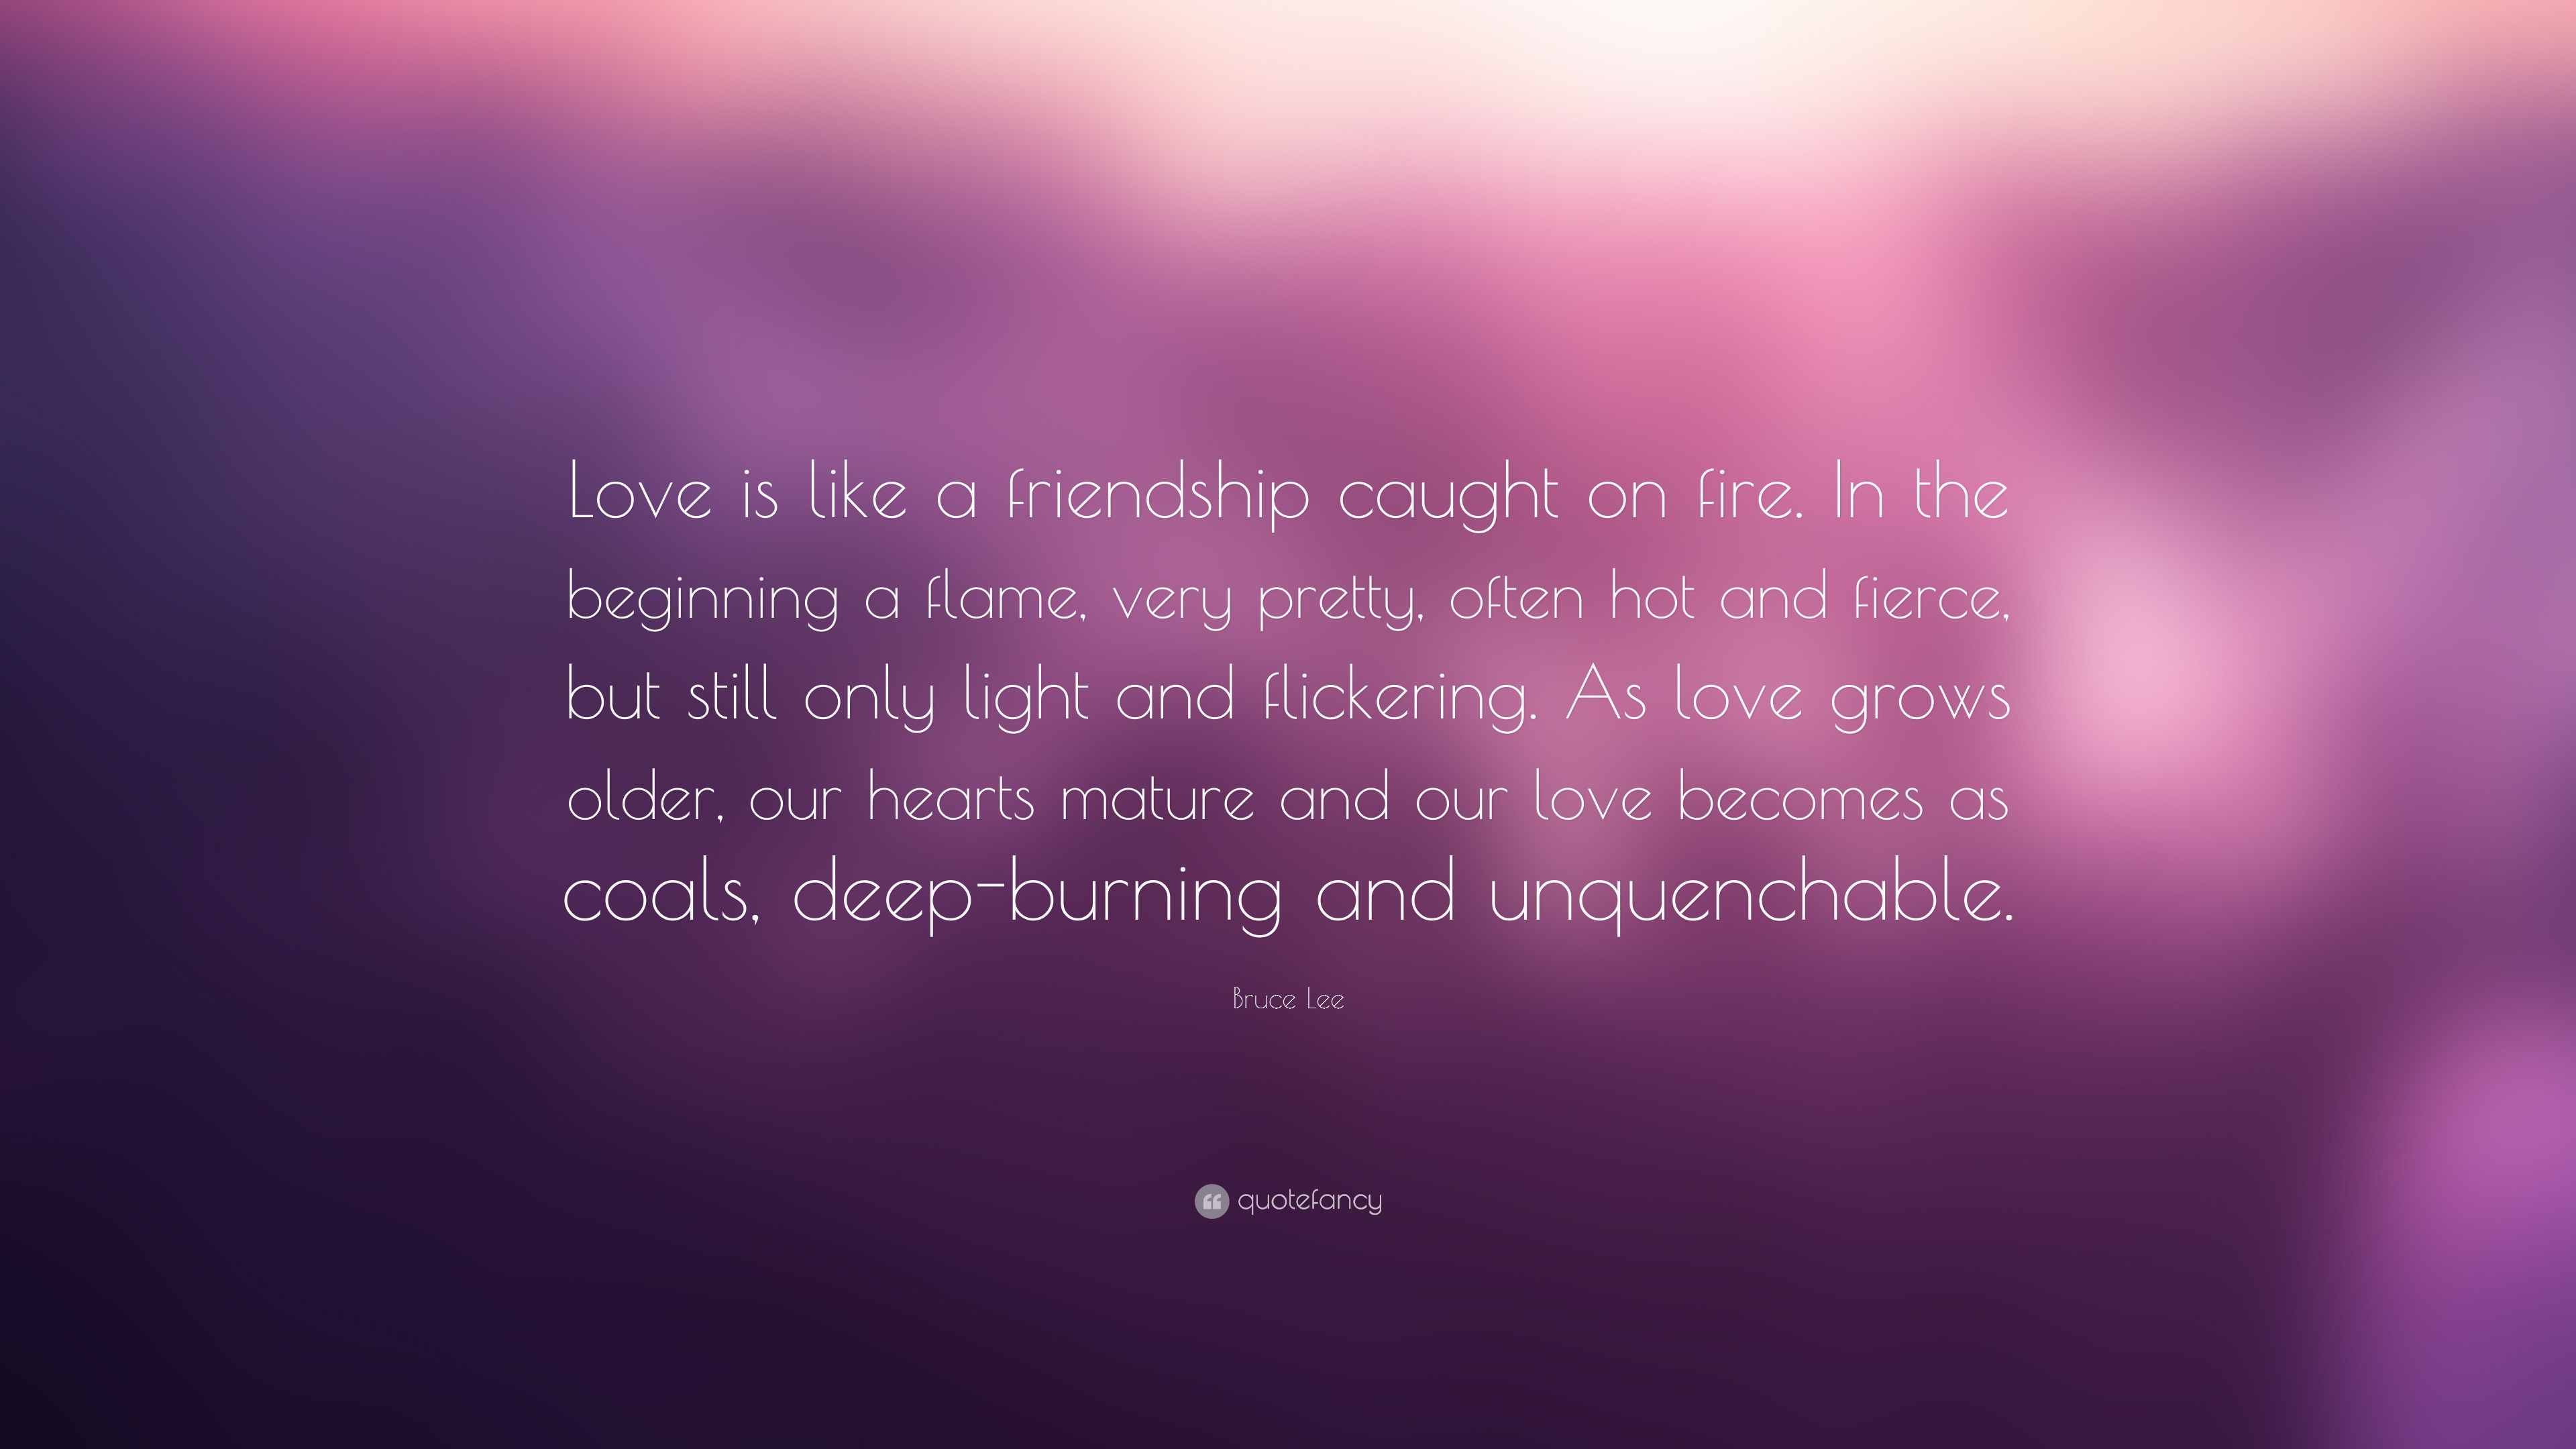 Bruce Lee Quote “love Is Like A Friendship Caught On Fire In The Beginning A Flame Very